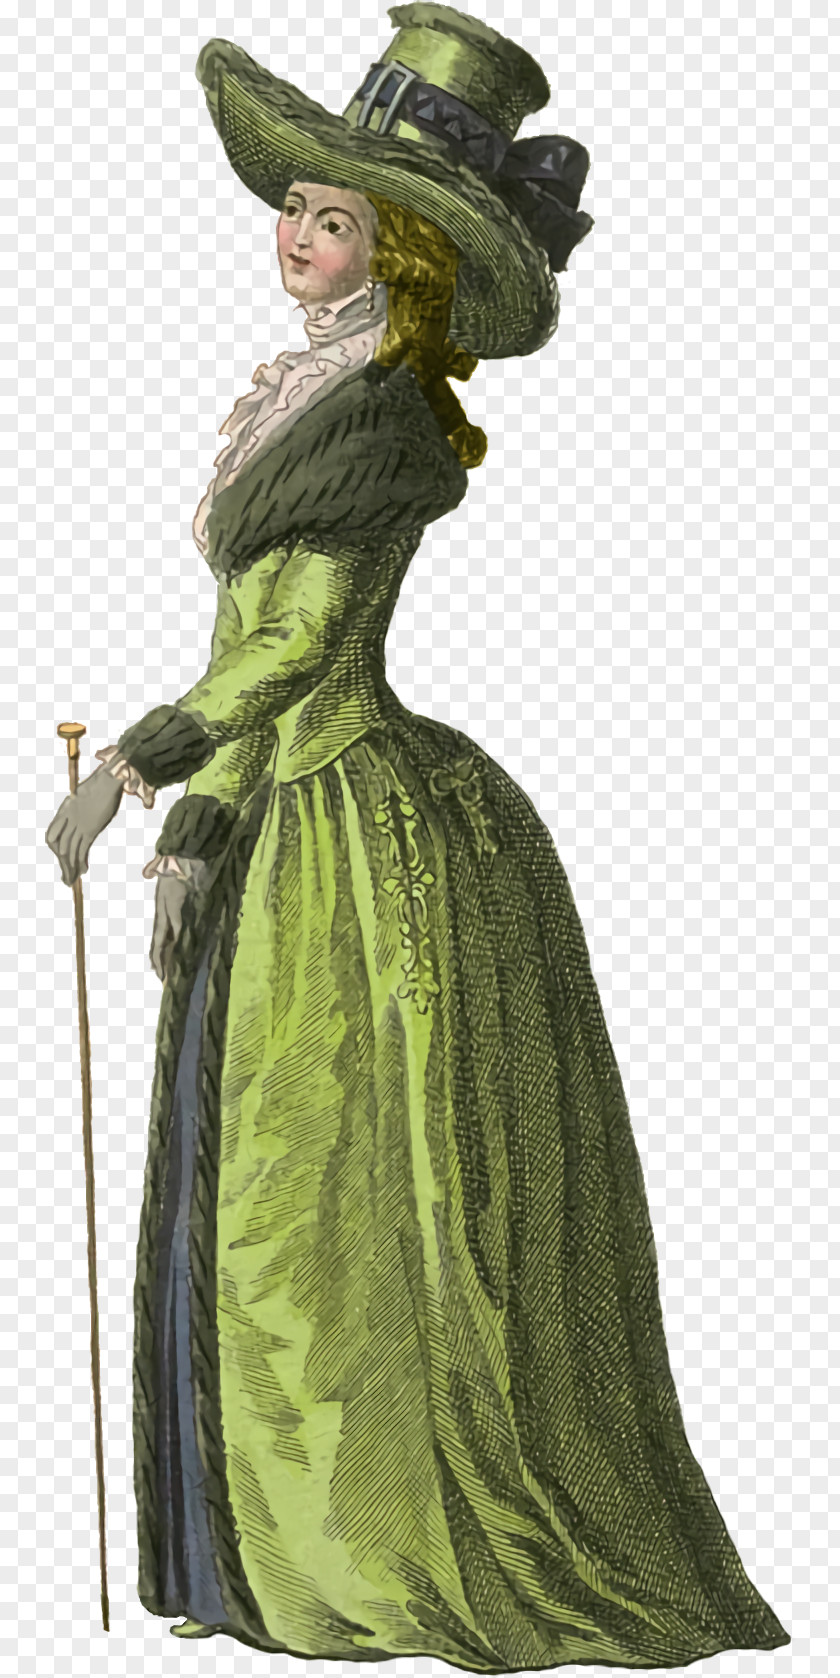 Figurine Outerwear Costume Design Green Victorian Fashion Standing PNG